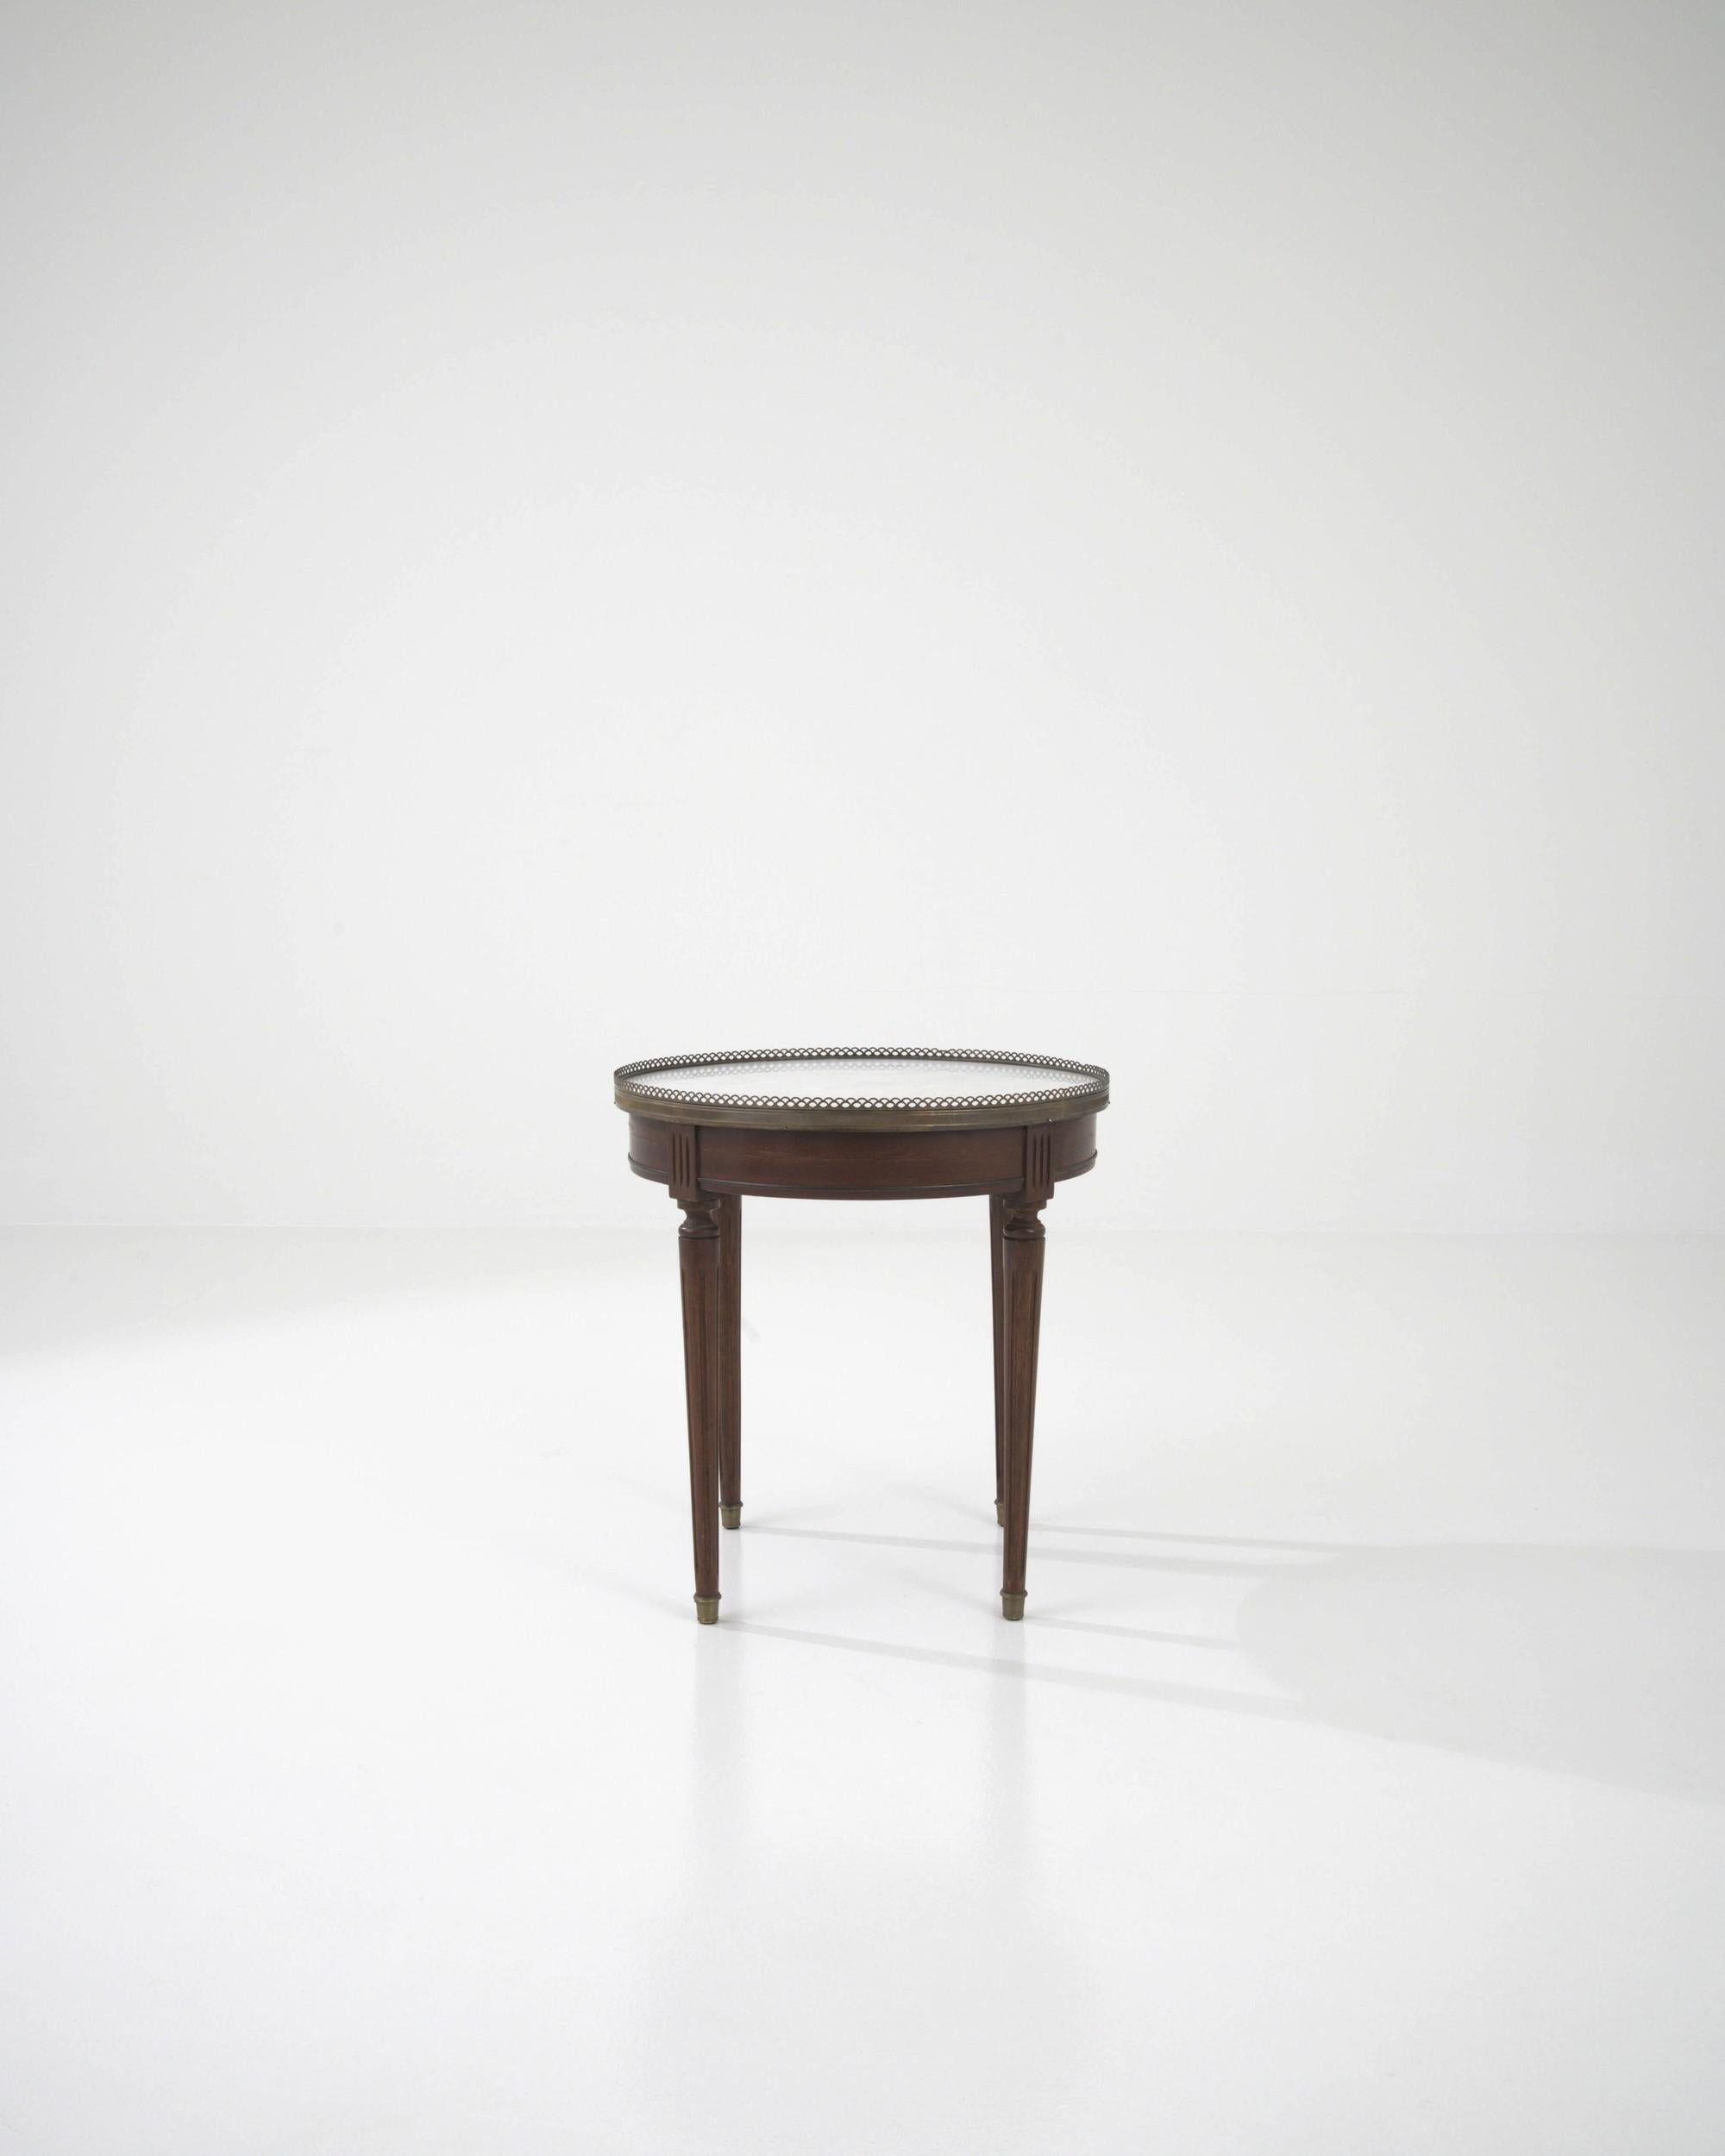 Crafted in France at the beginning of the 20th century, this petite side table flaunts a round white marble top framed in skillfully formed brass edging. A few carved elements adorning the base, made of rich dark wood, reveal a high level of taste